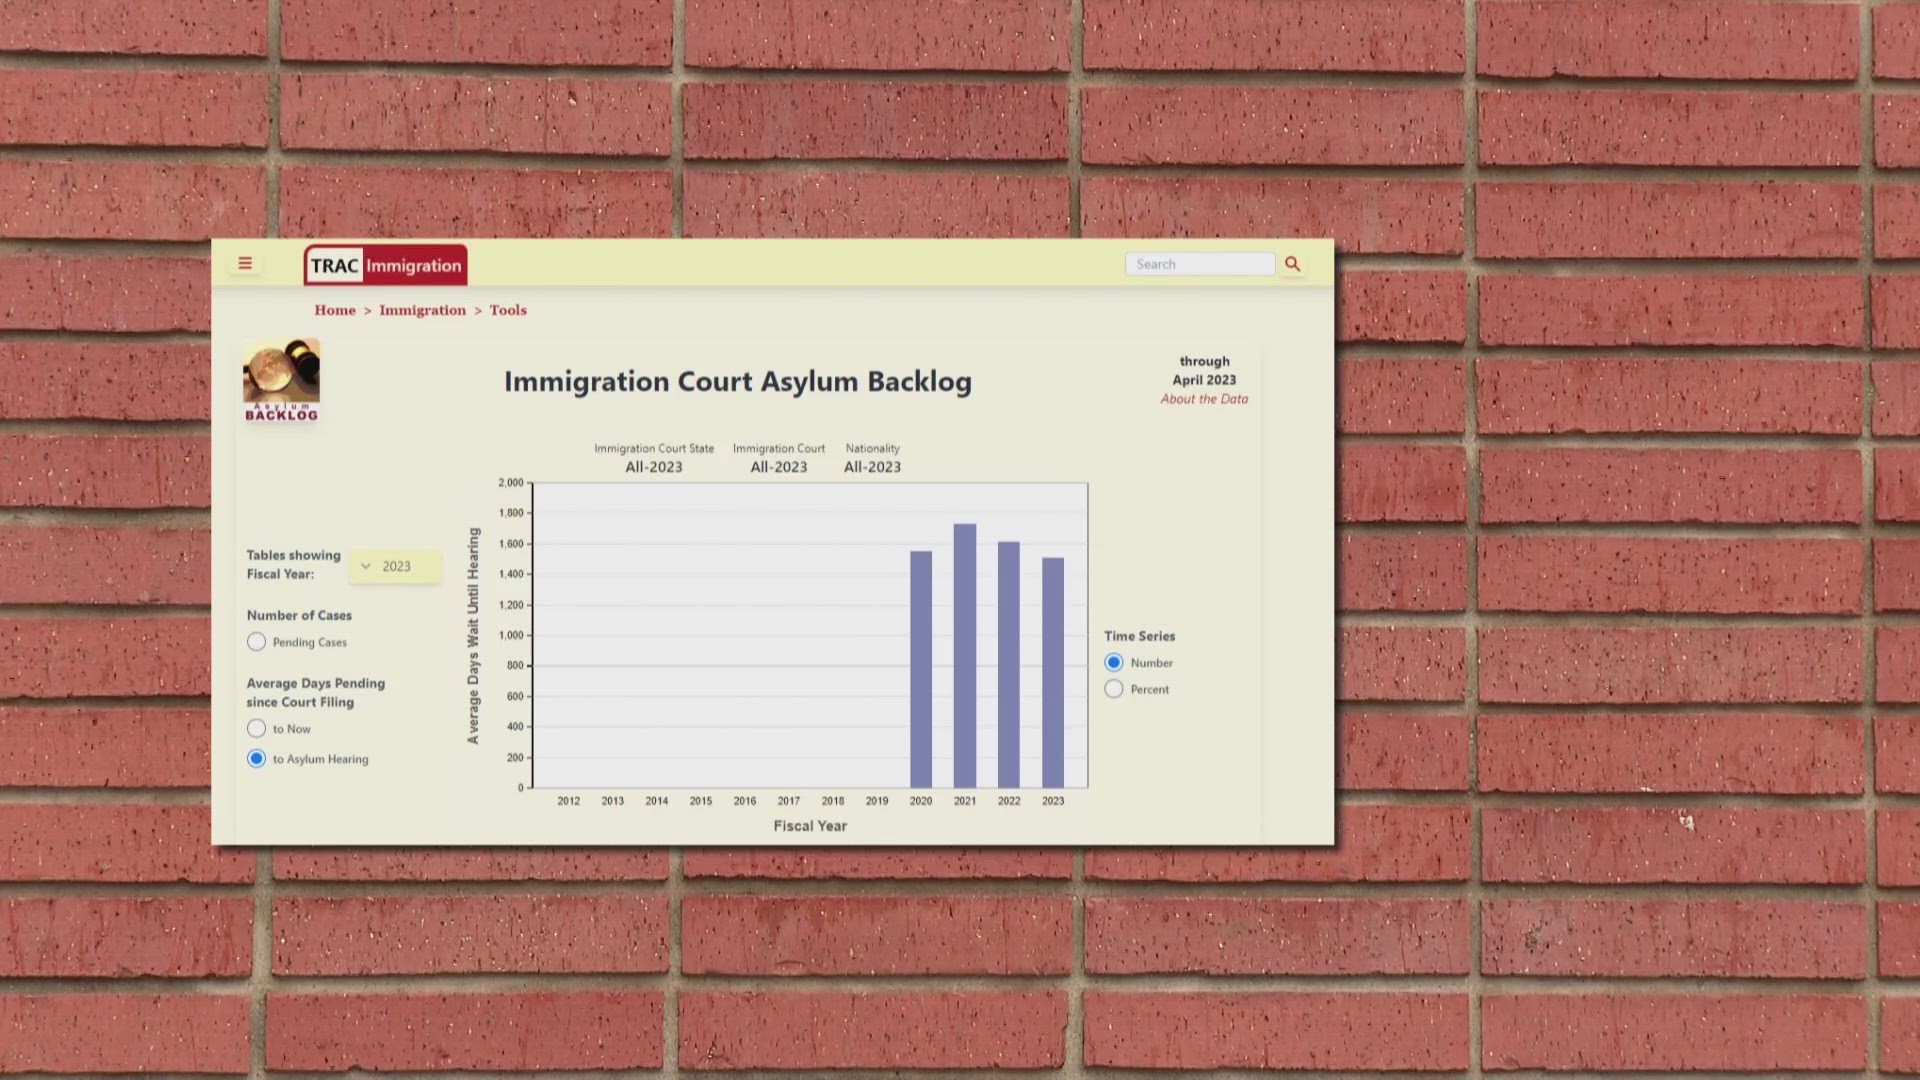 About a thousand asylum officers are being sent to immigration detention facilities to help screen asylum requests.